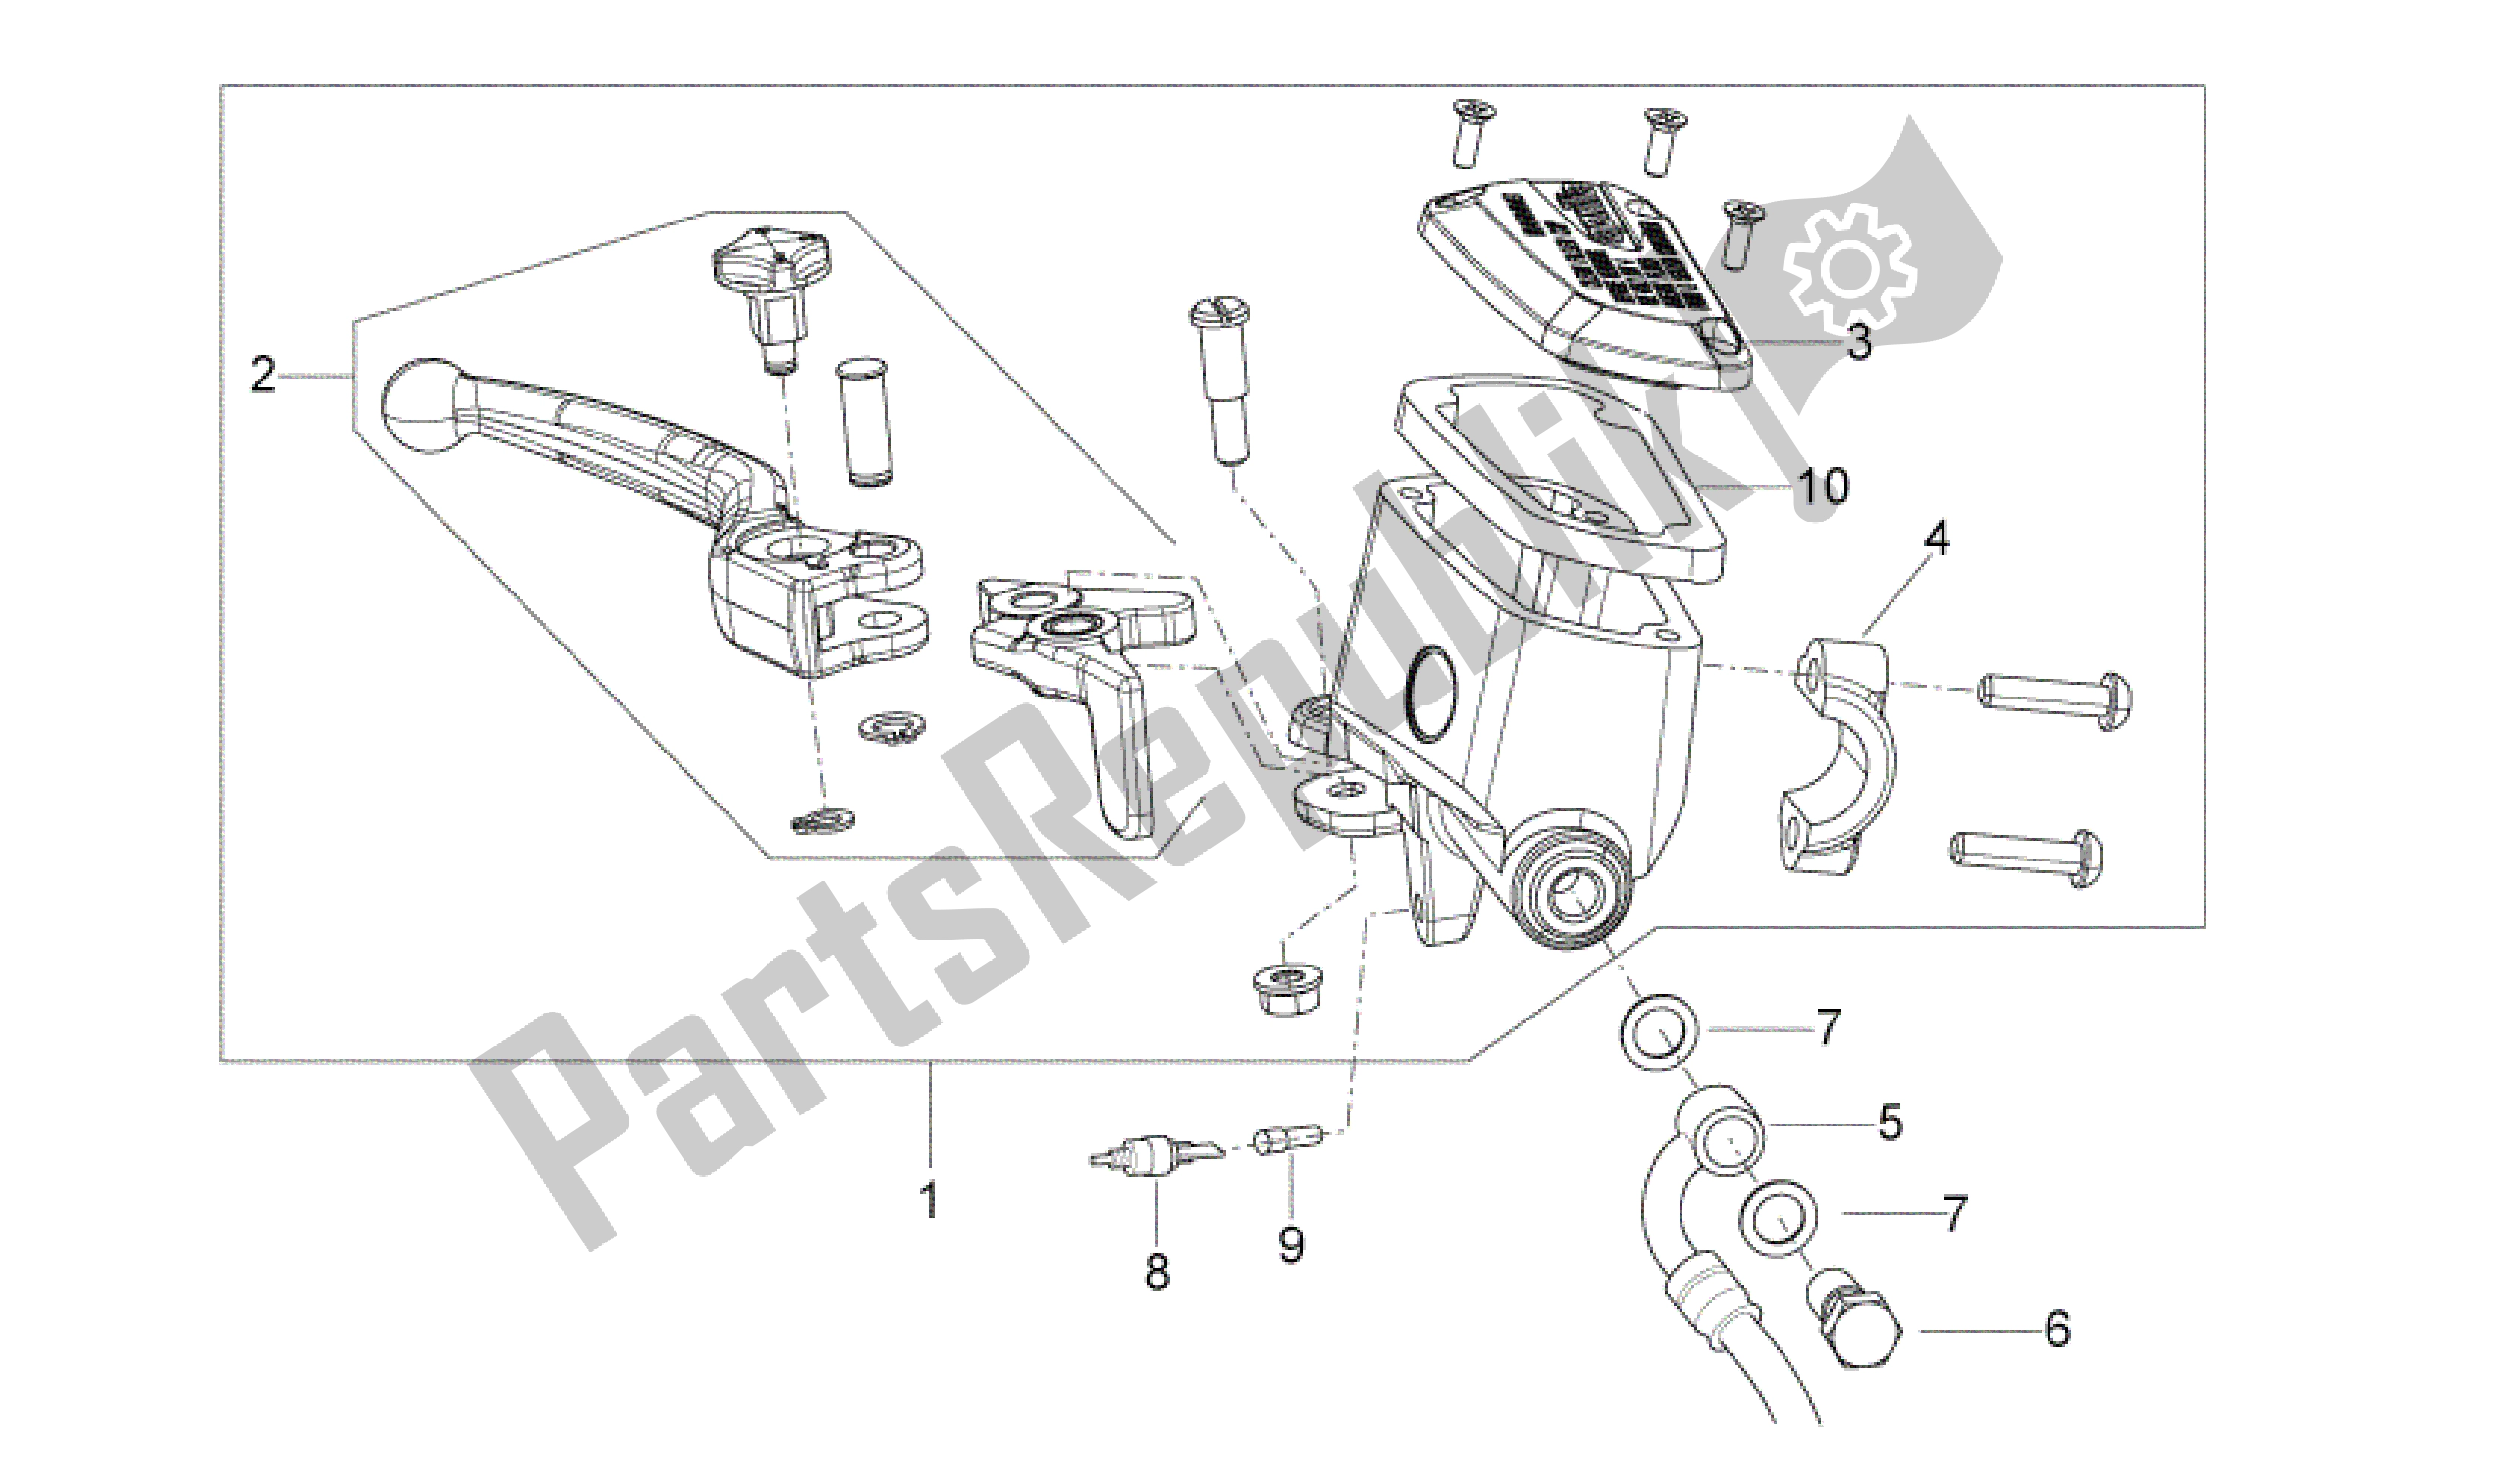 All parts for the Front Master Cilinder of the Aprilia Mana 850 2009 - 2011